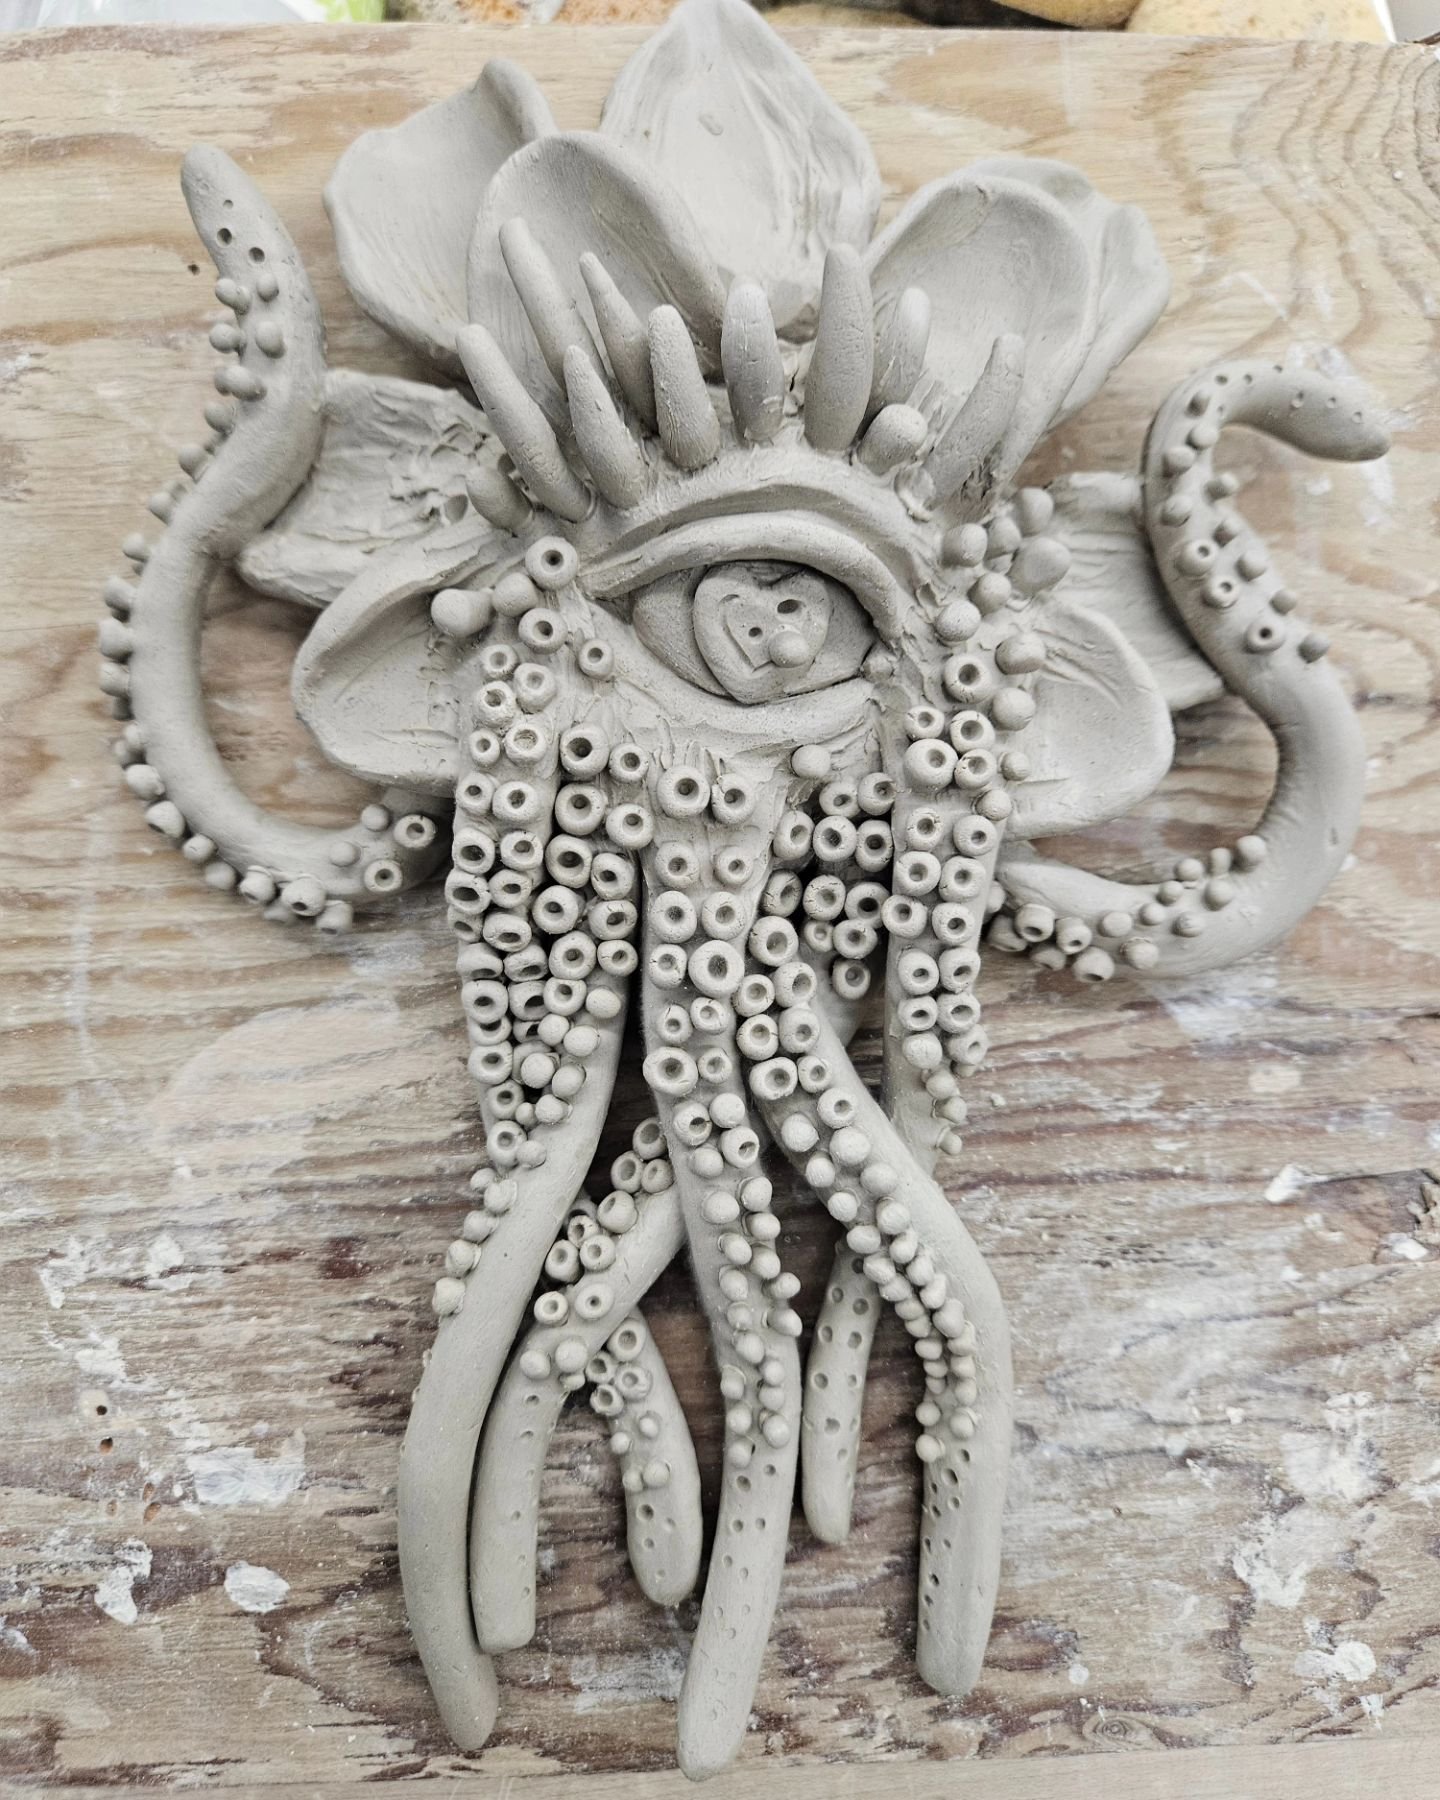 And now for a new friend! Thanks to my evening clay class, @windwardcc, I've been able to explore a new medium! I've been making some fun new creatures lately. Not sure what to name this critter... suggestions? 🐙🦪🐠🍄🪸🫰
.
.
.
#octopus #squid #he'